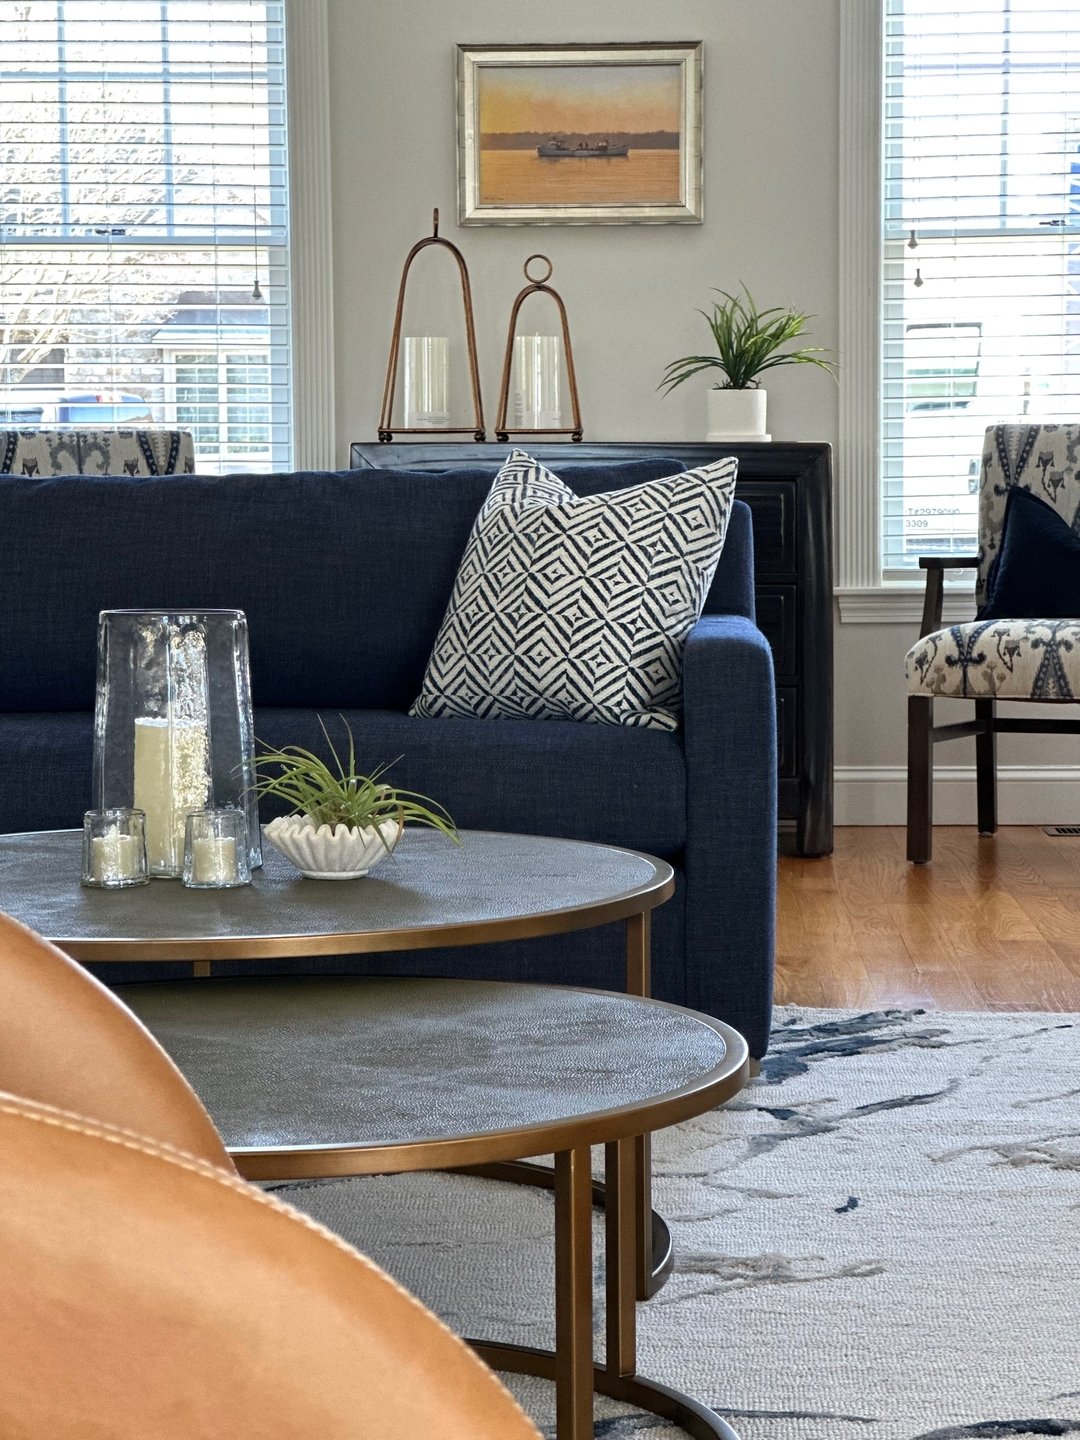 Goodbye vanilla. Gave this Living Room mixed materials patterns and materials to spice it up.

#livingroom #familyroom #modernfamily #authenticdesign #homedesign #navy #cozyhome #pattern #color #swivel #modernliving #newnenglandhome #pattern #coastal